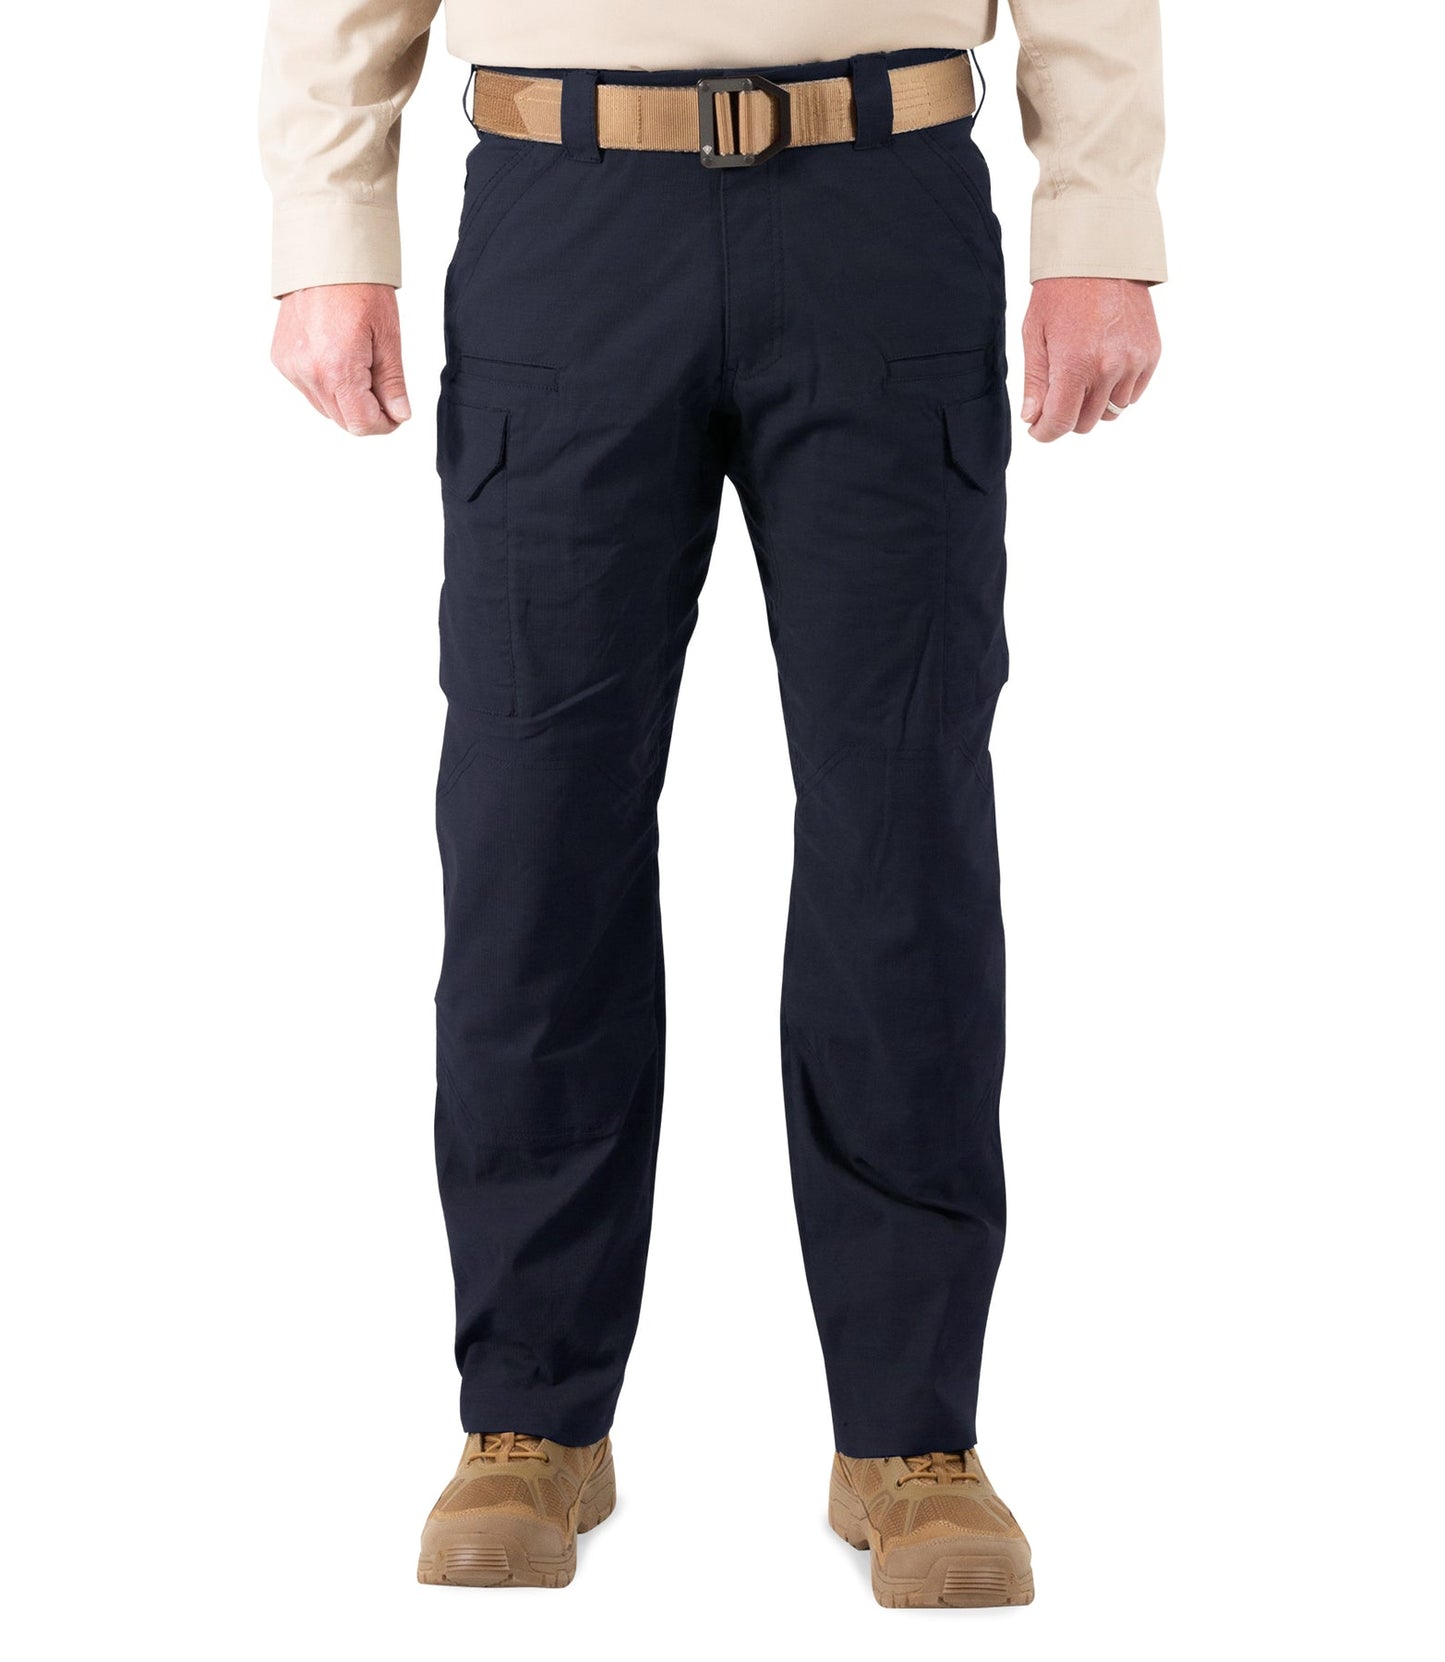 First Tactical Men’s V2 Tactical Pants Midnight Navy